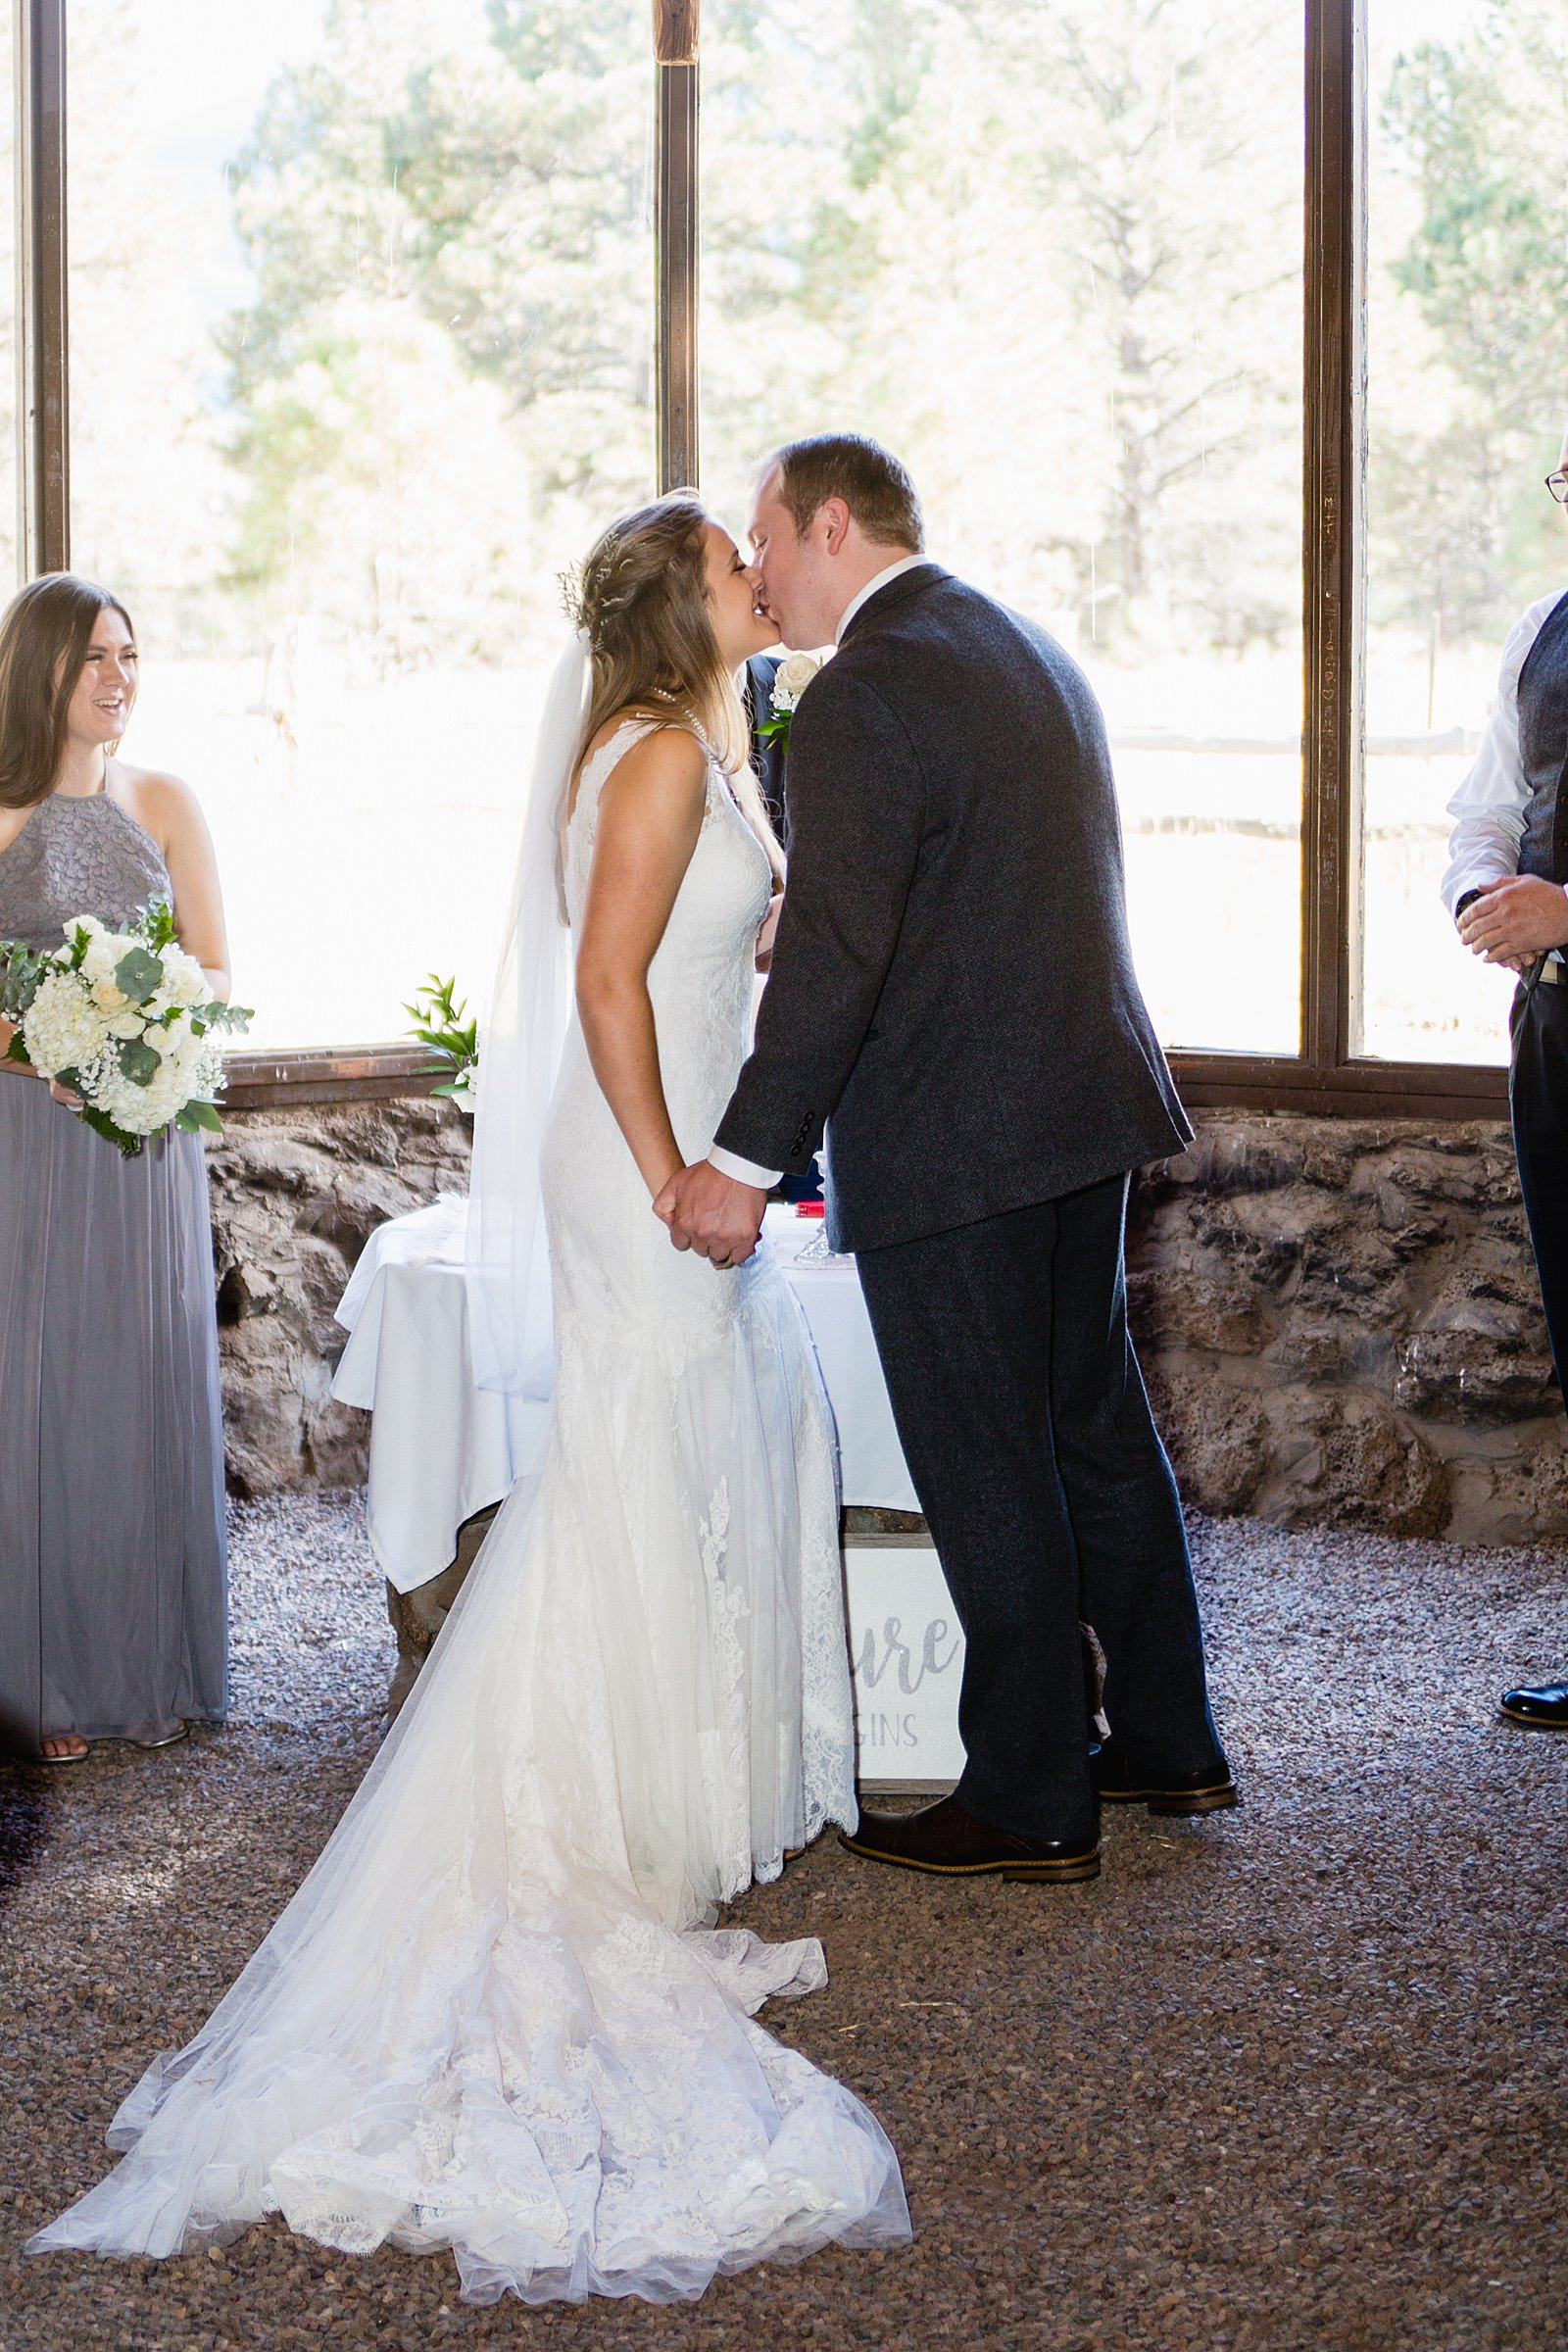 Bride and Groom share their first kiss during their wedding ceremony at Chapel of the Holy Dove by Arizona wedding photographer PMA Photography.